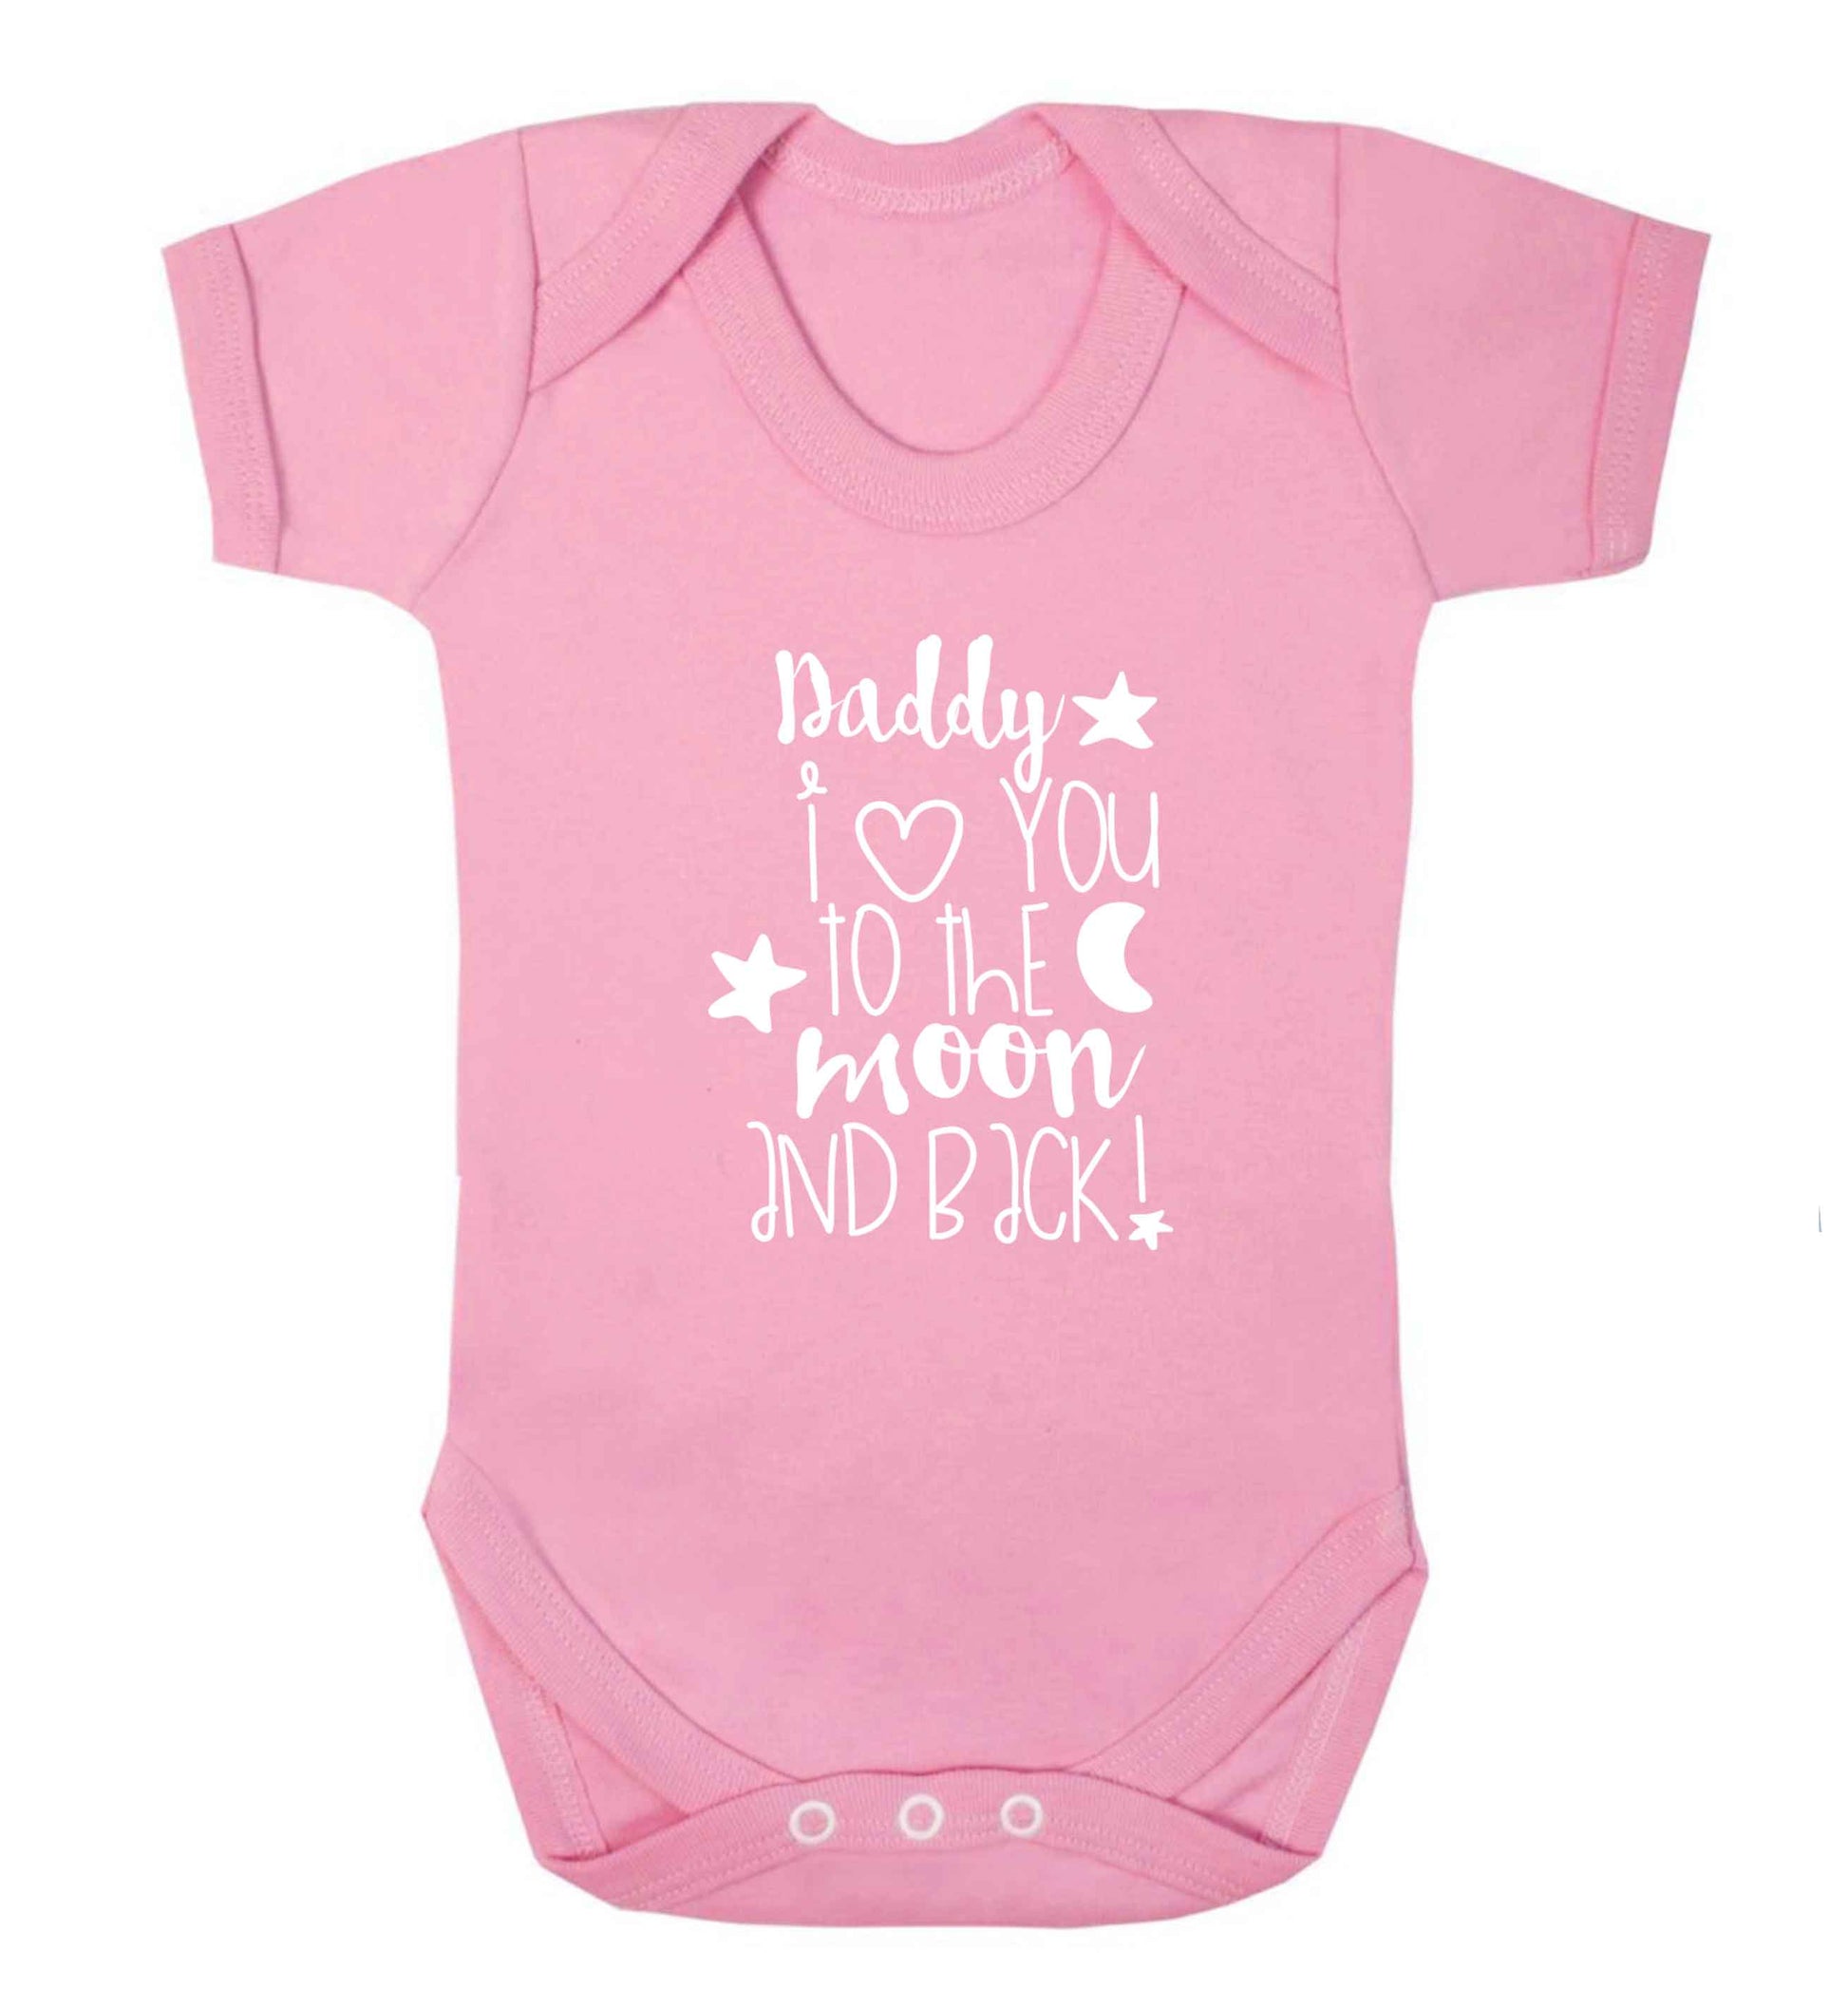 Daddy I love you to the moon and back baby vest pale pink 18-24 months